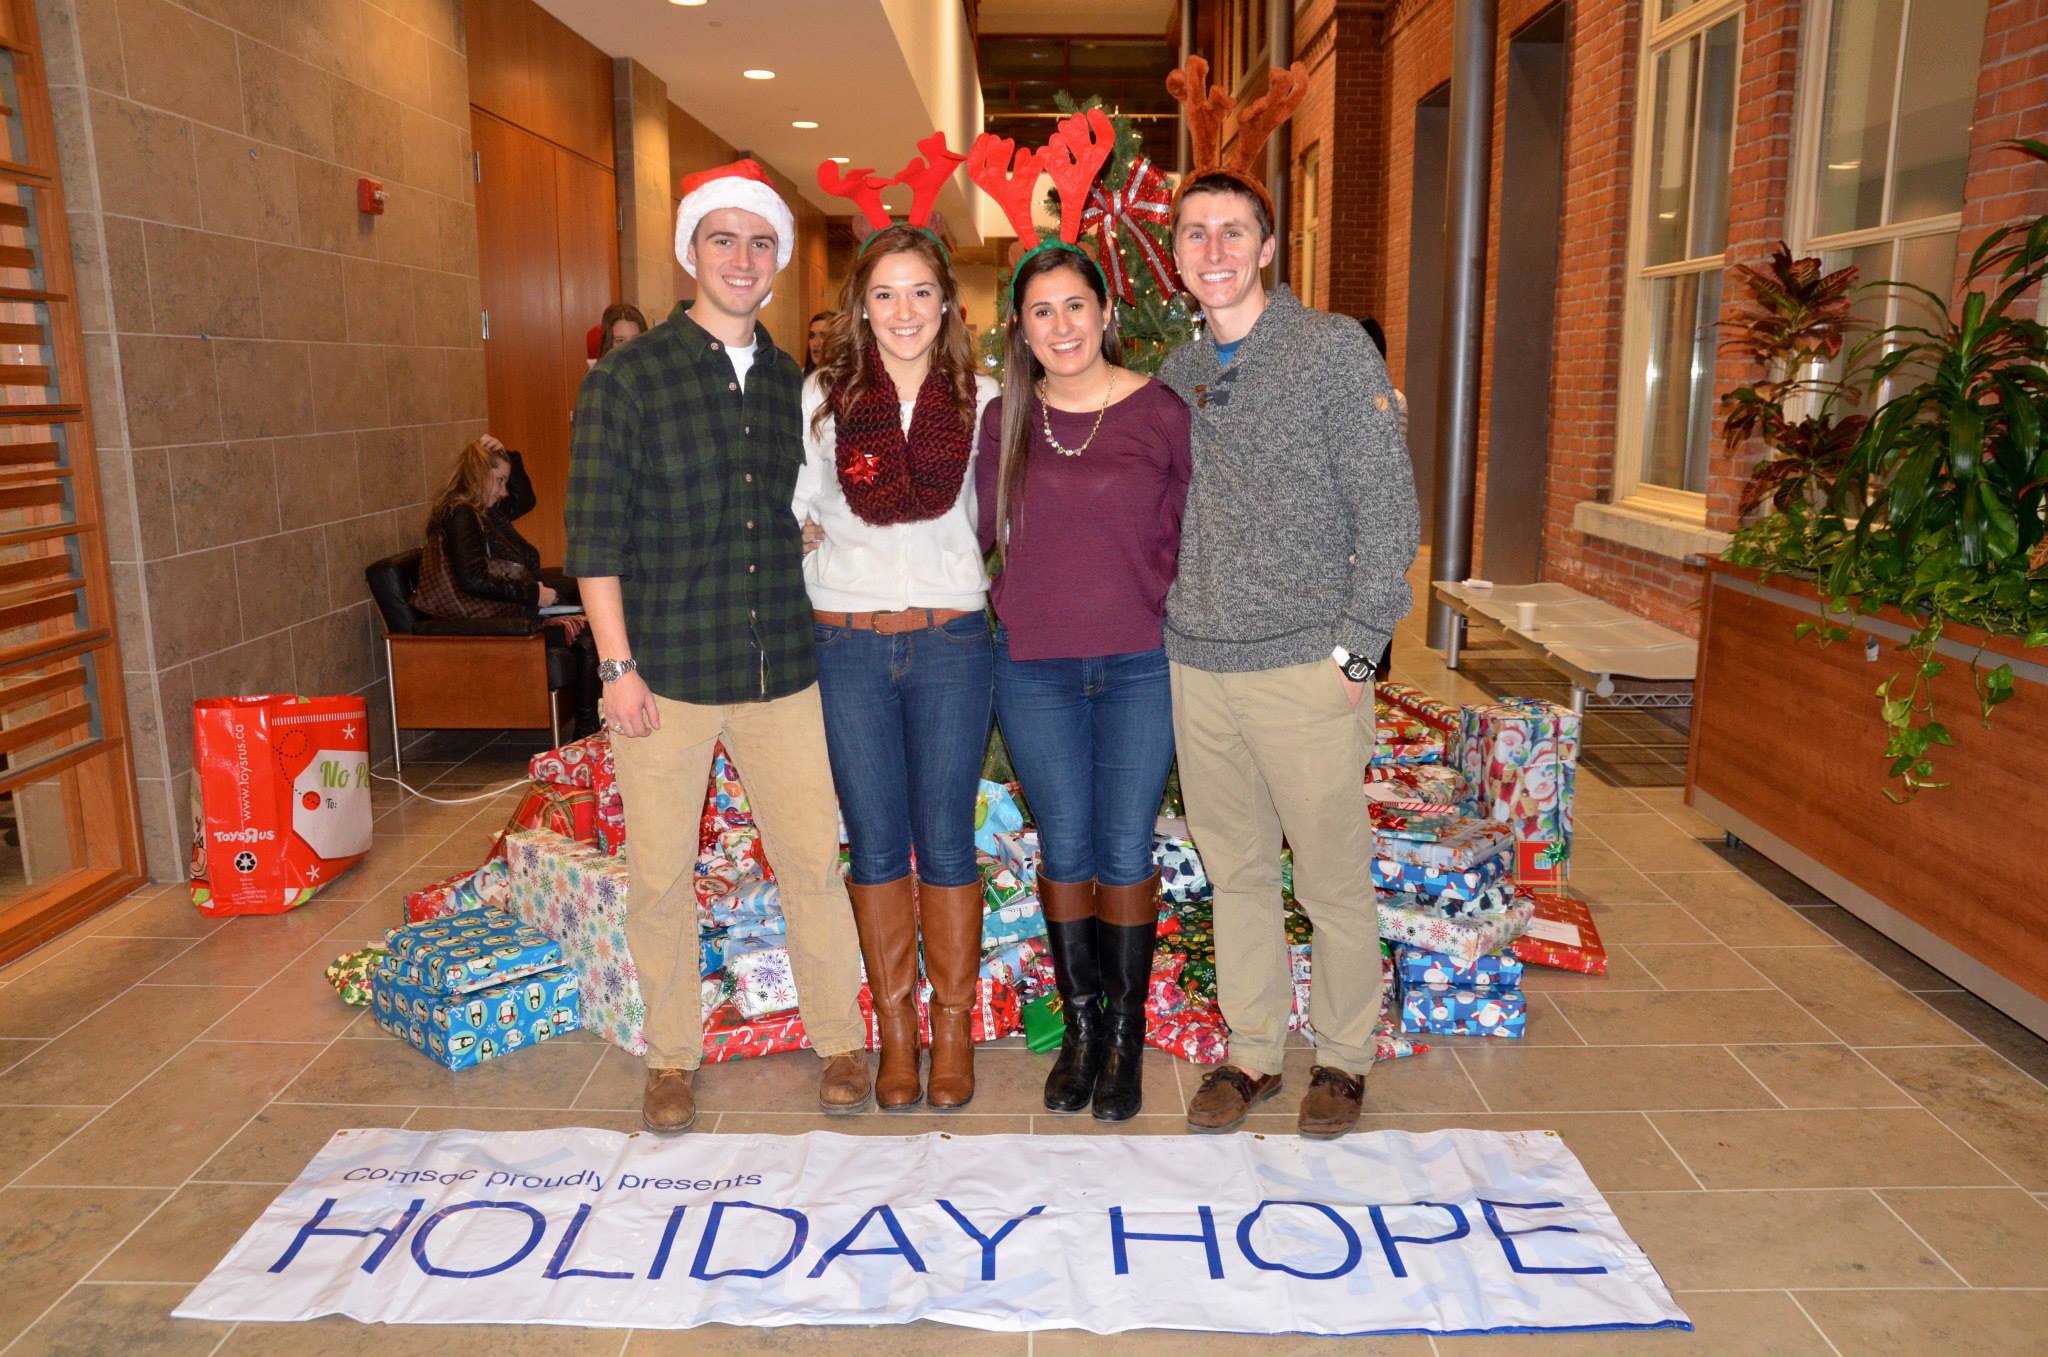 Holiday Hope toy drive campaign brings cheer